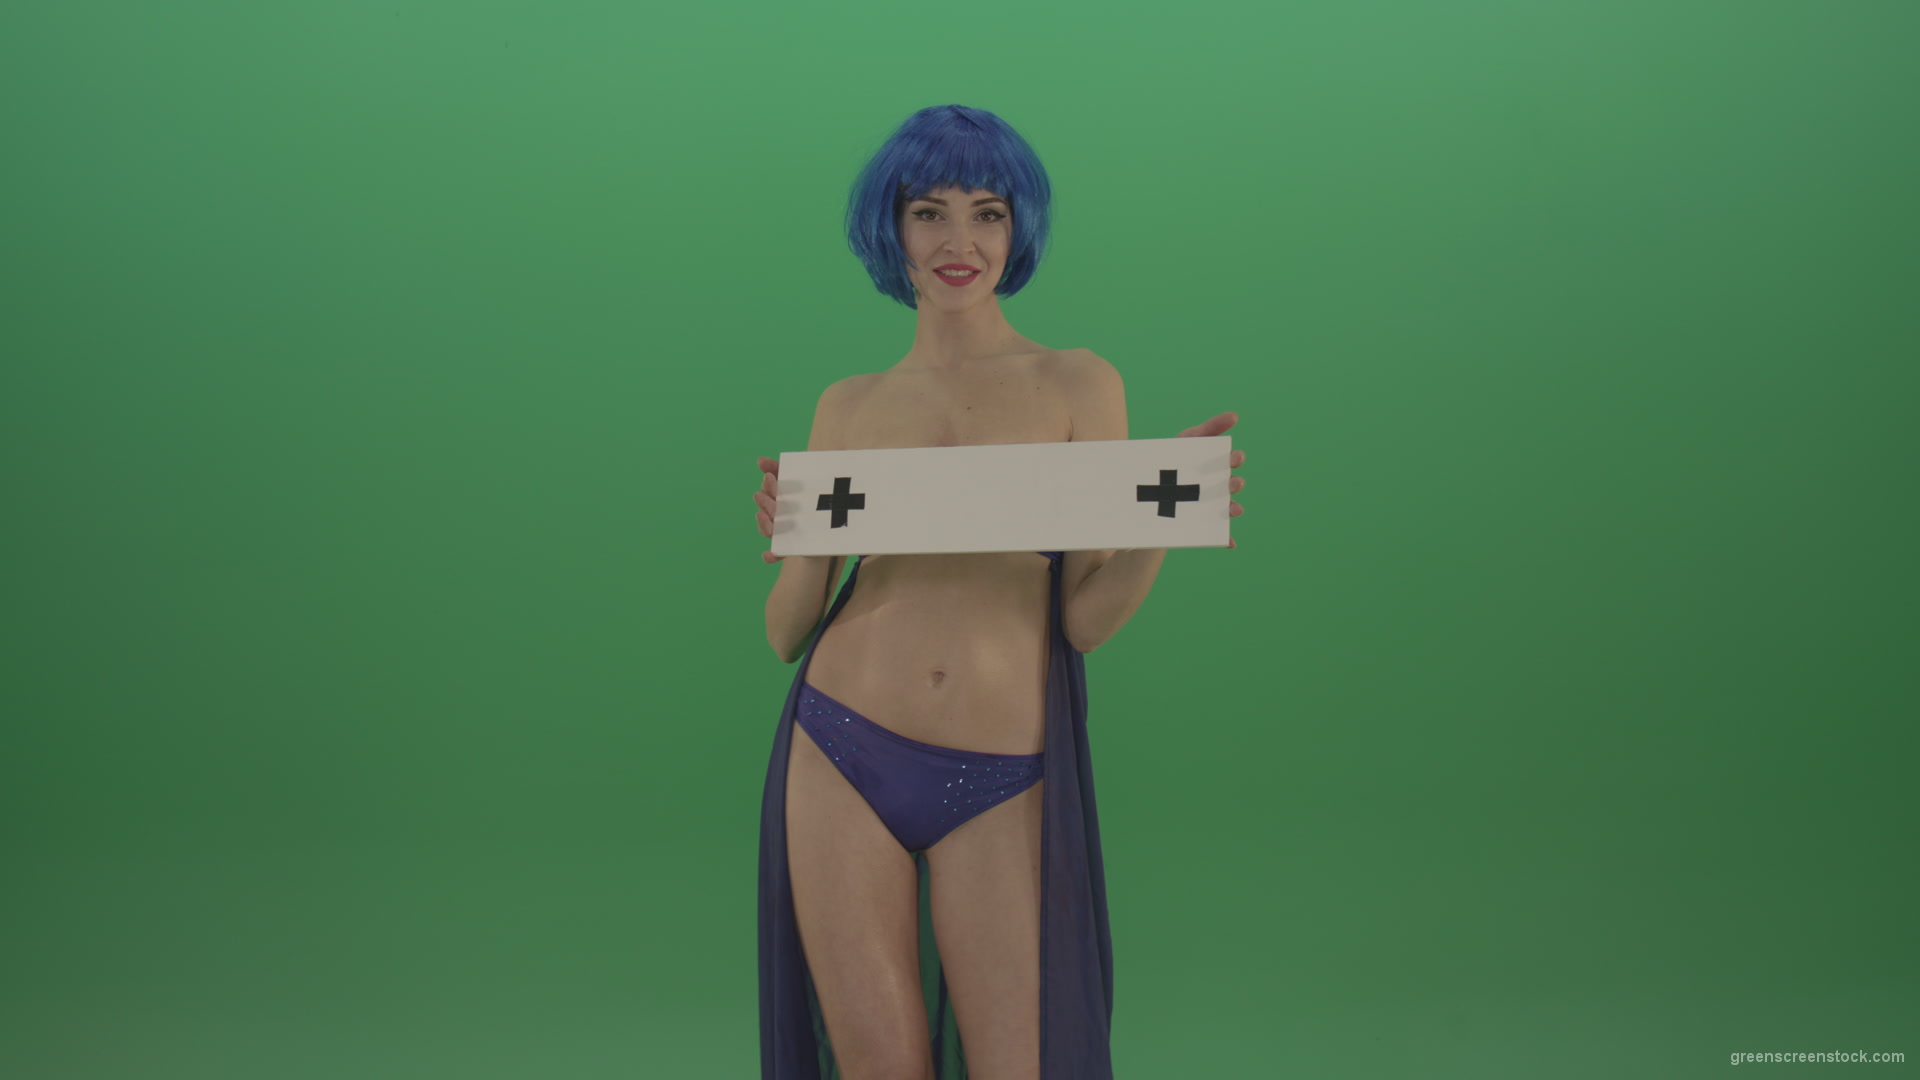 Blue-hair-elegant-naked-girl-posing-with-text-mockup-template-plane-on-green-screen_009 Green Screen Stock